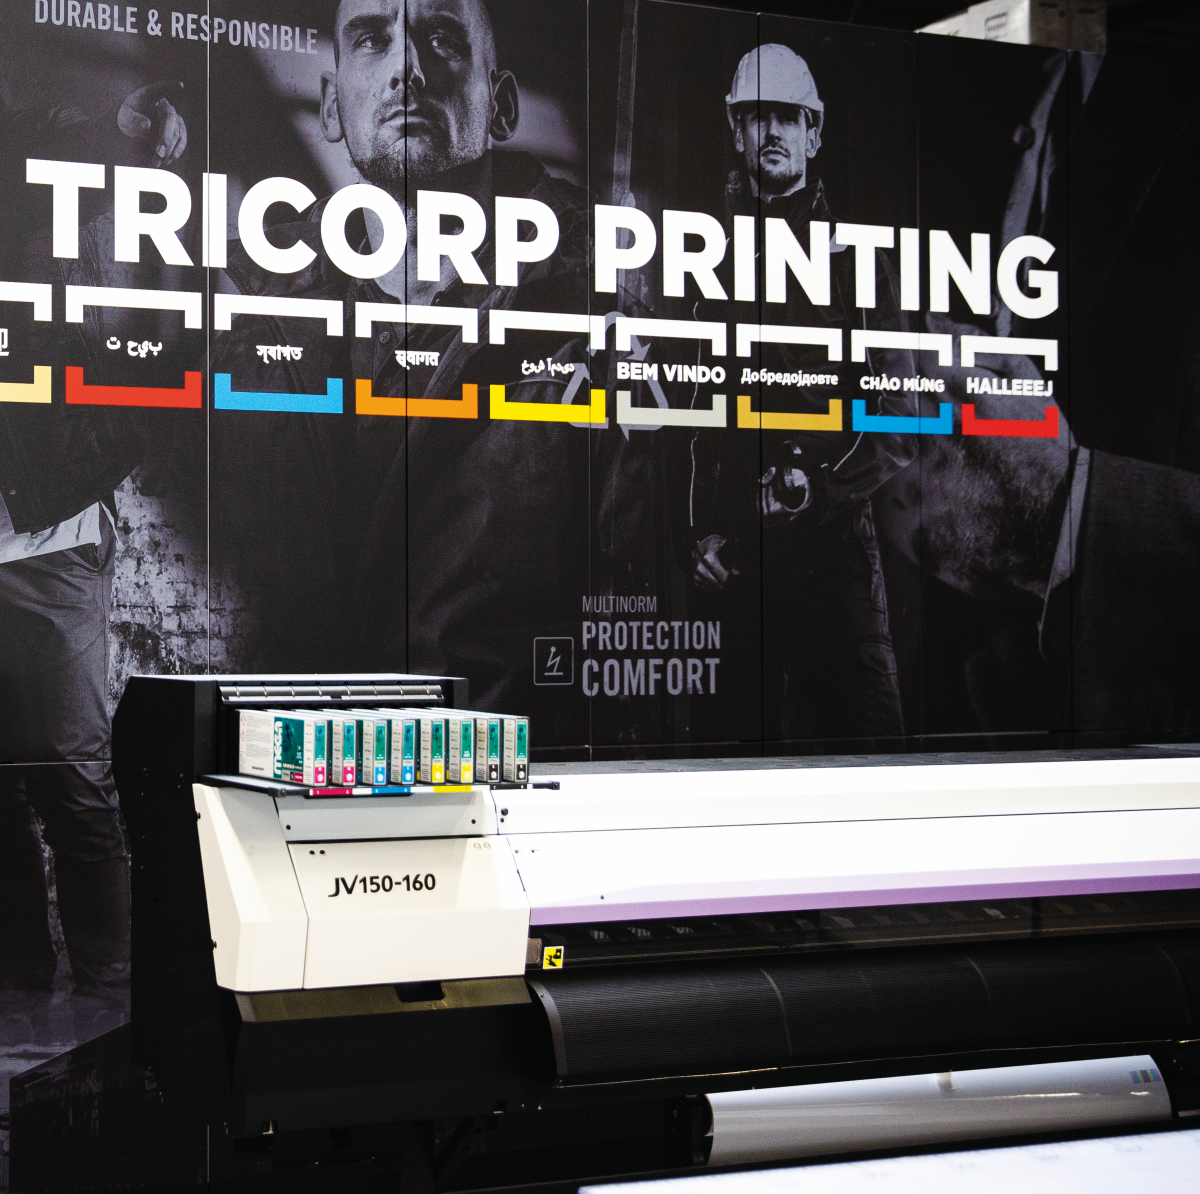 Printing and embroidering company clothing at Tricorp